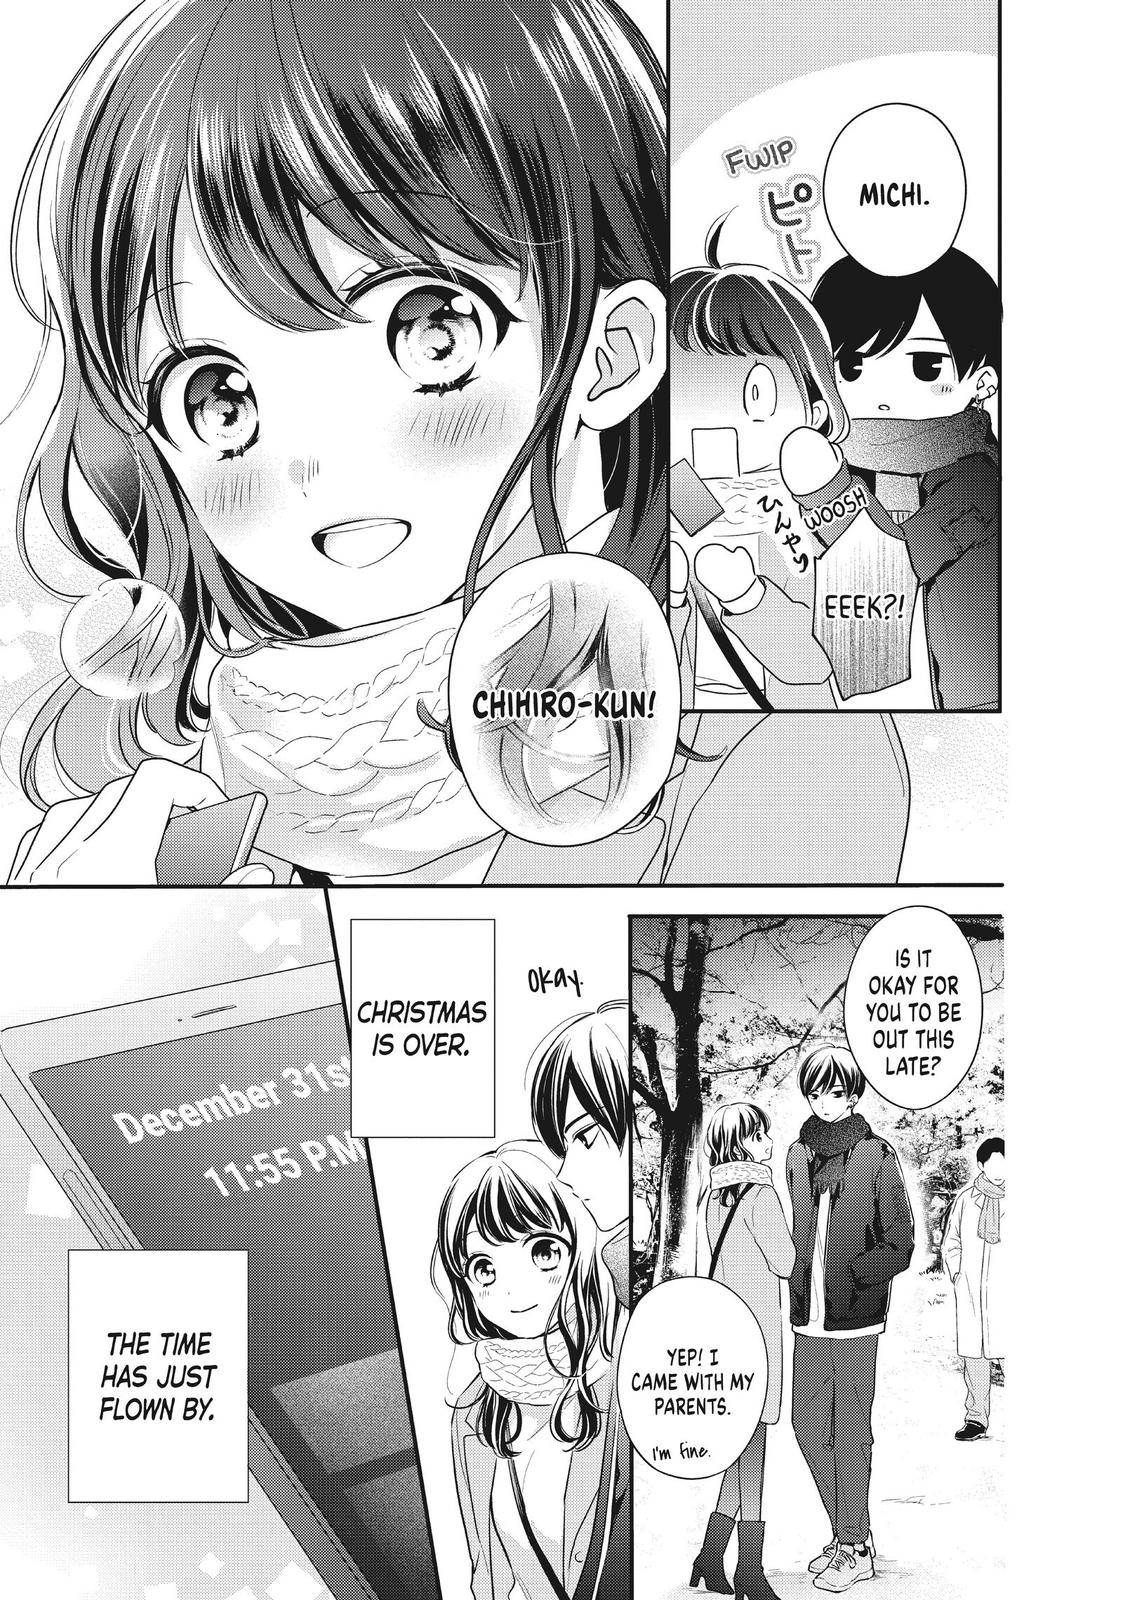 Chihiro-kun Only Has Eyes for Me - chapter 18 - #3